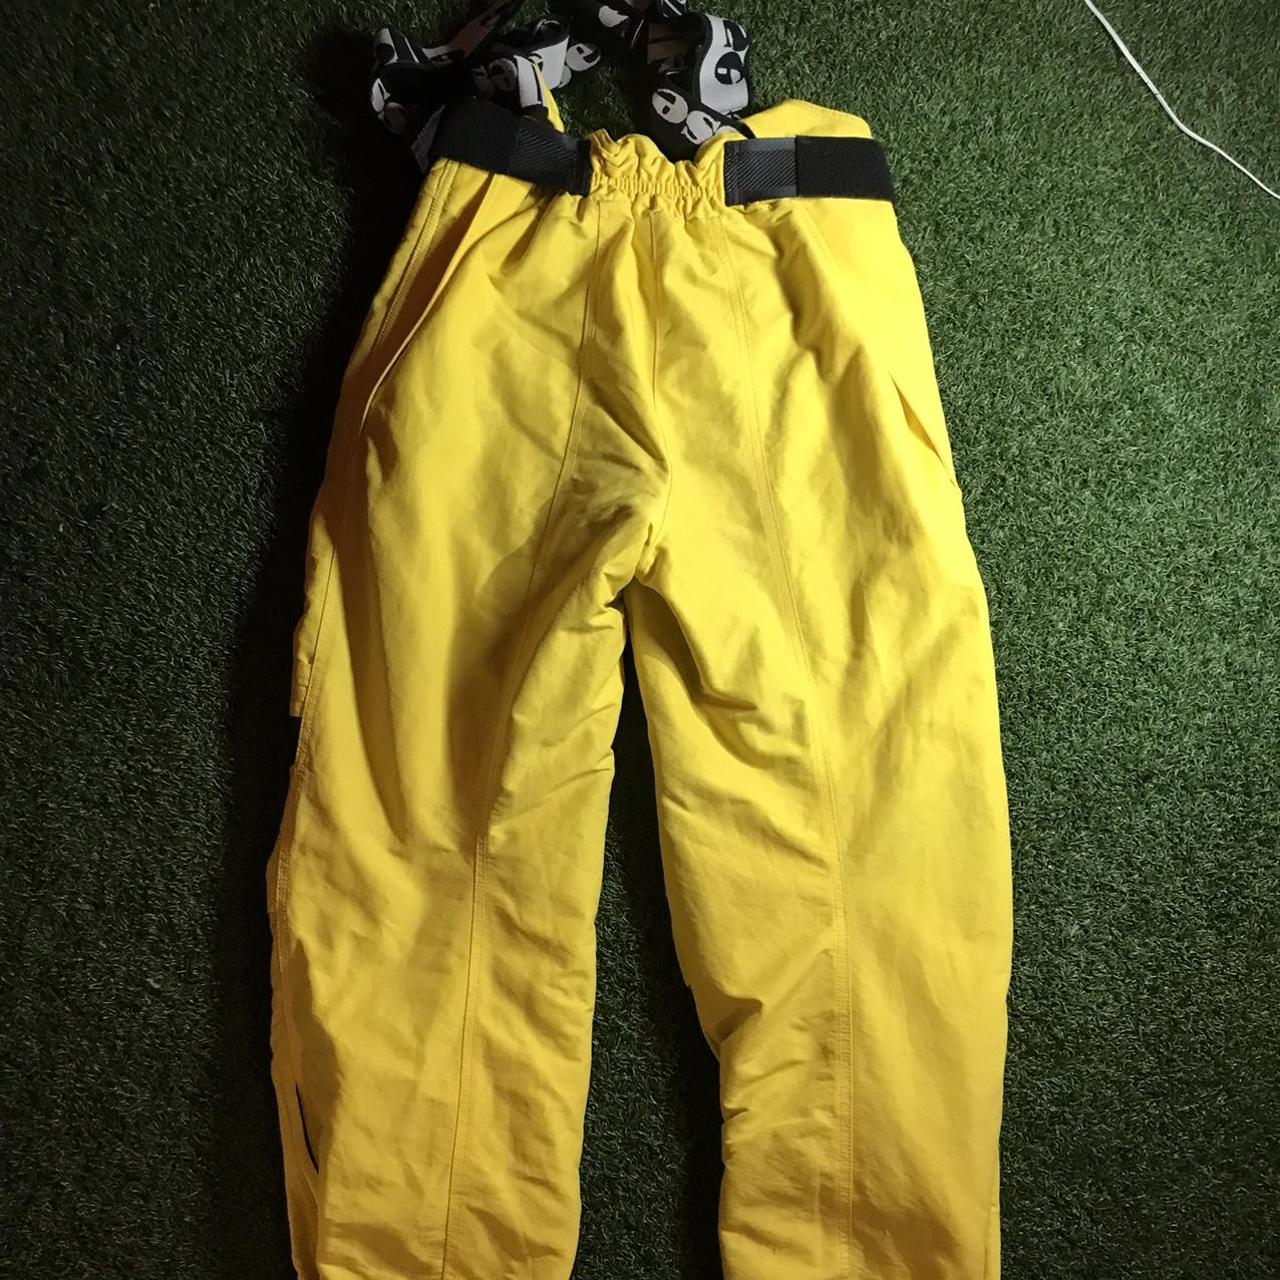 Ellesse Men's Yellow and Black Trousers (2)